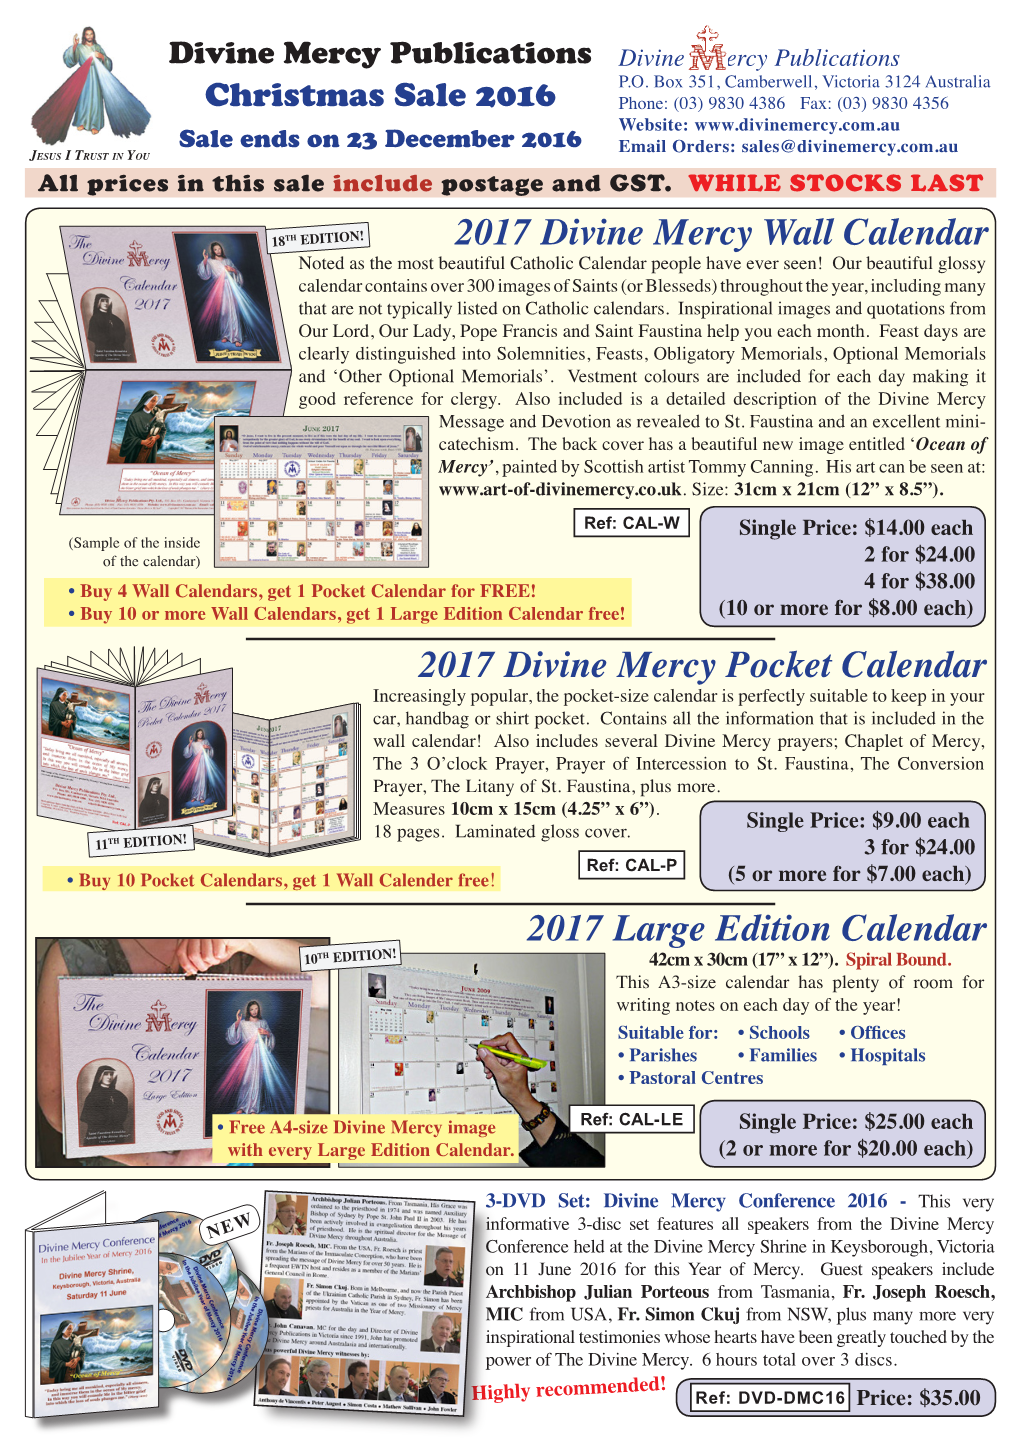 2017 Divine Mercy Pocket Calendar Increasingly Popular, the Pocket-Size Calendar Is Perfectly Suitable to Keep in Your Car, Handbag Or Shirt Pocket